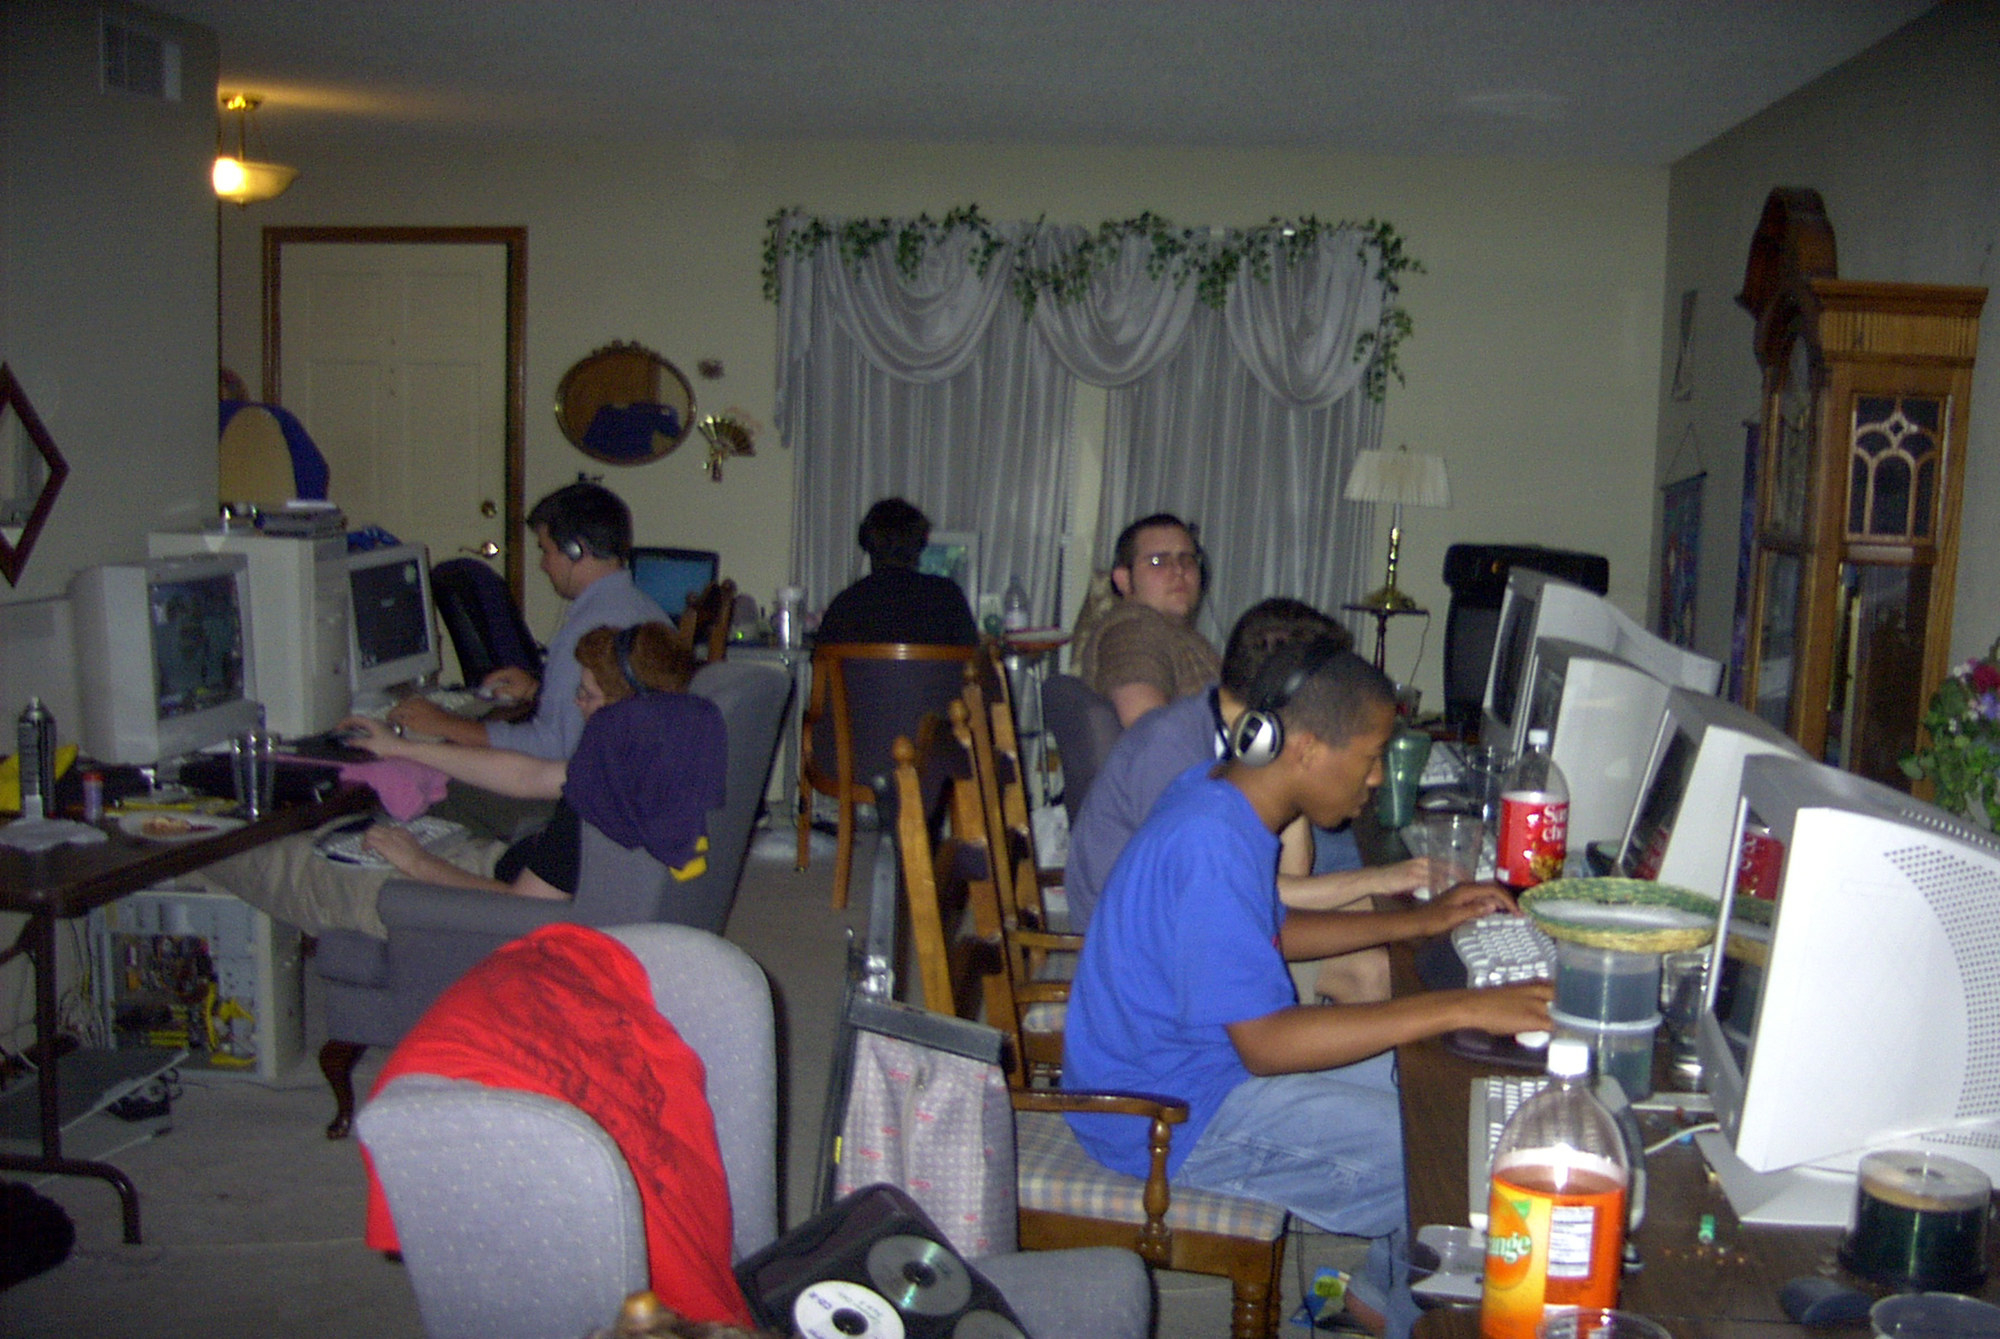 An image of people at a LAN party.